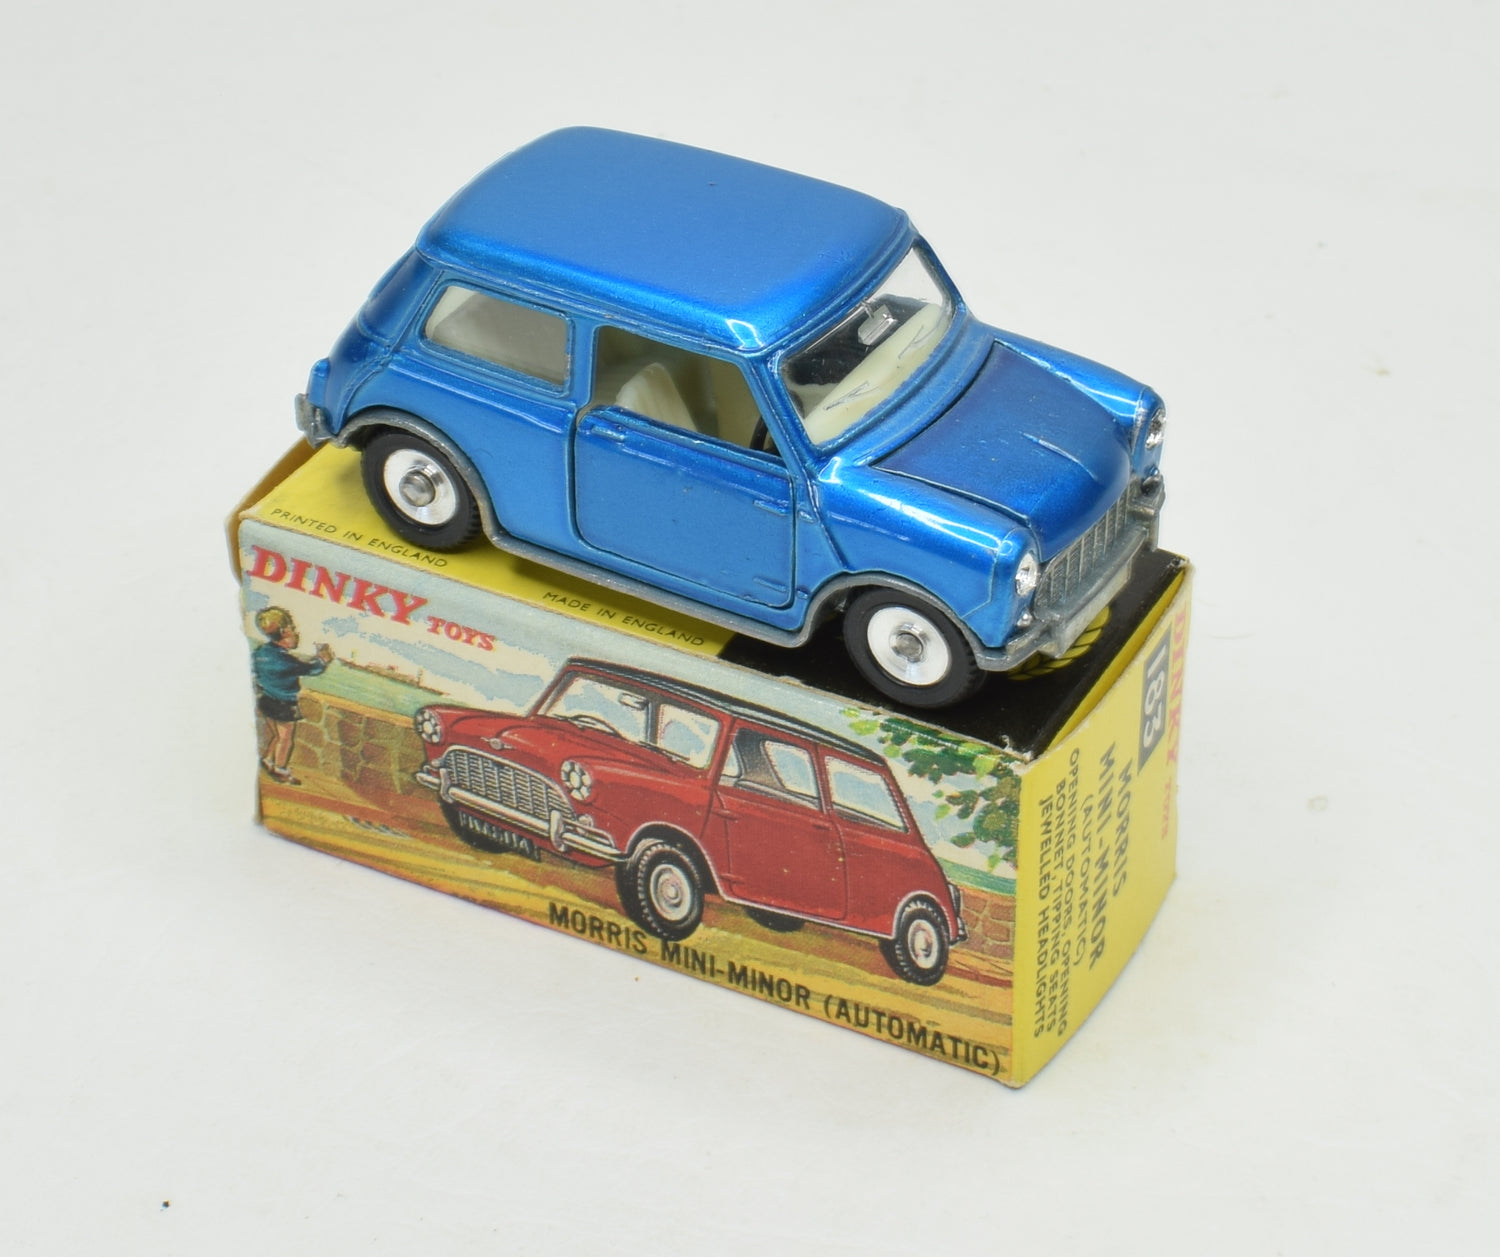 Dinky toys 183 Morris Mini Minor Virtually Mint/Boxed 'Stenland' Collection